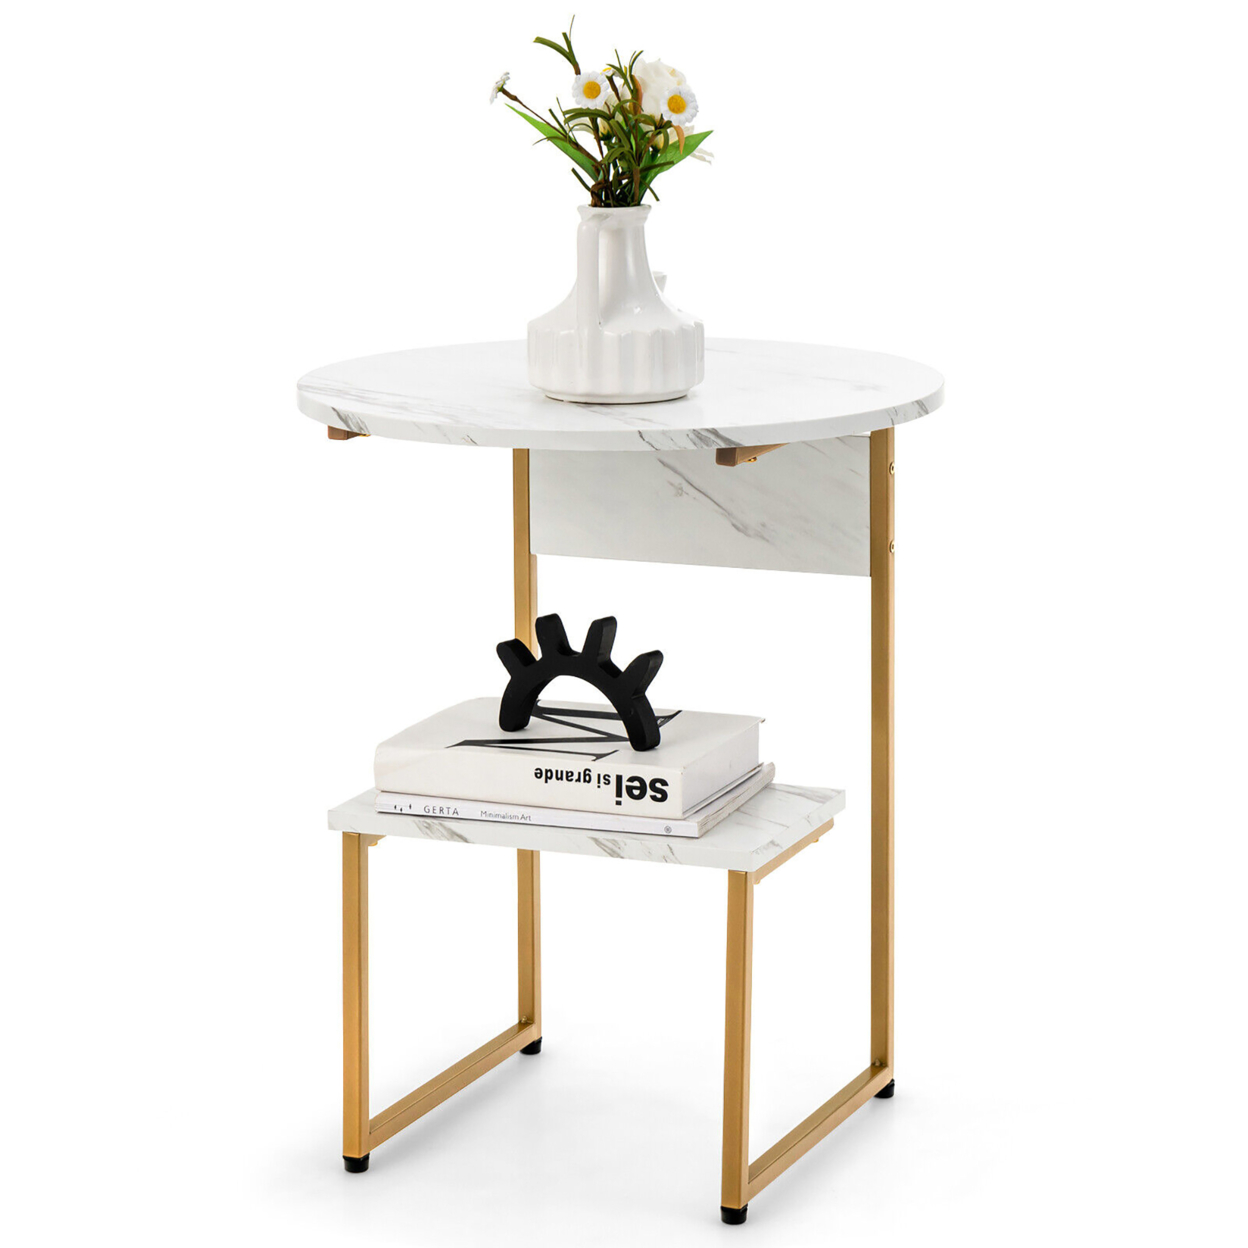 2-Tier Side Table Nightstand End Table Coffee Table W/ G-Shaped Steel Frame